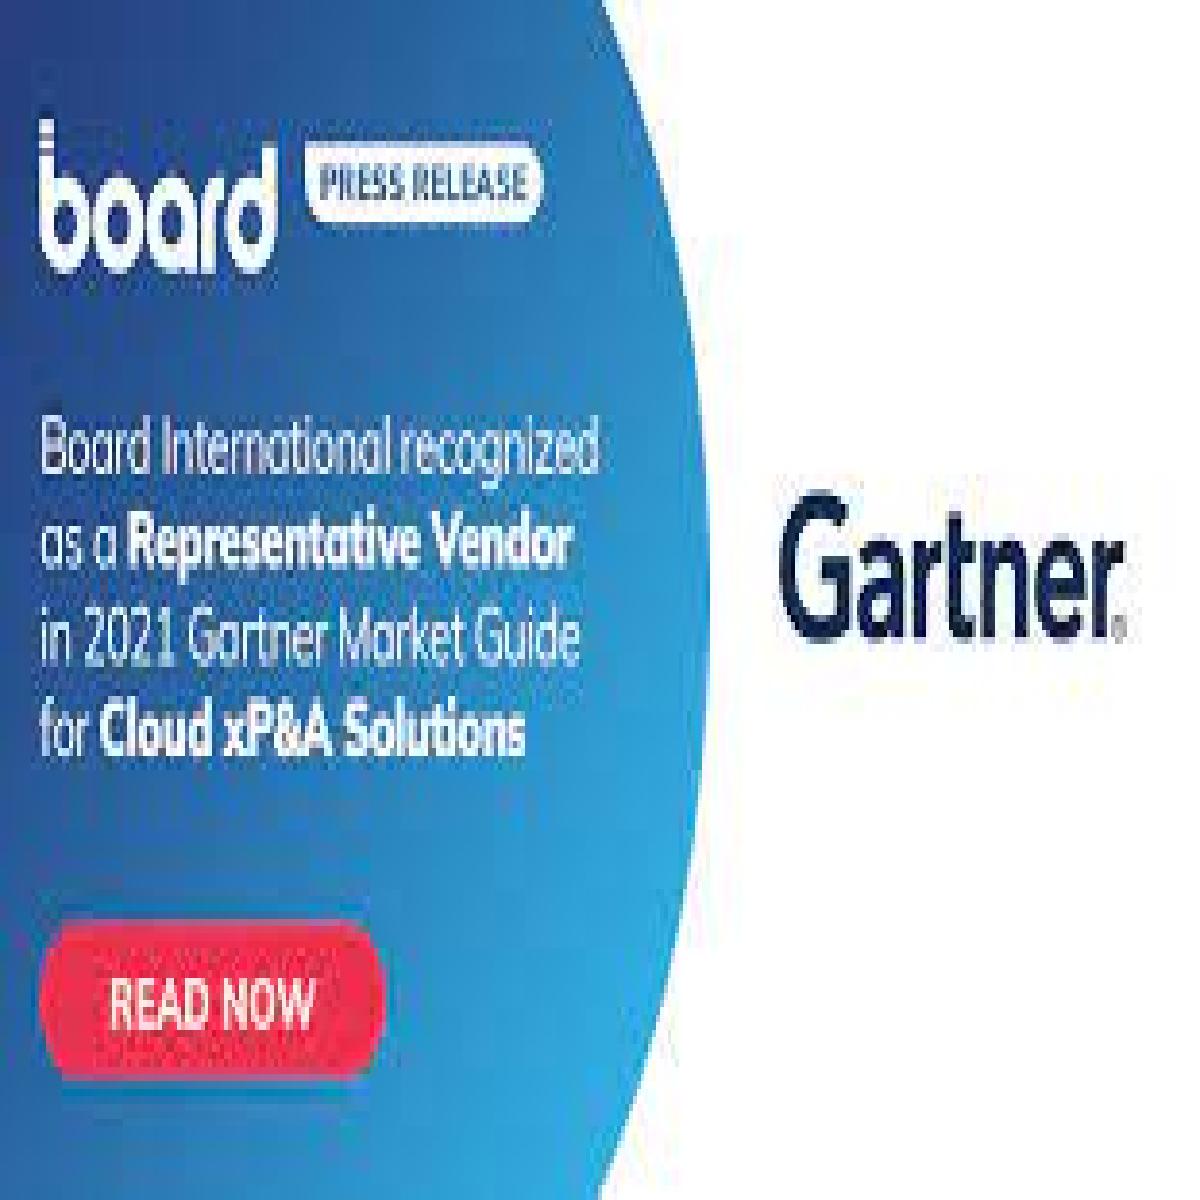 Board International Named as a Representative Vendor in 2022 Gartner® Market Guide for Cloud Extended Planning and Analysis Solutions